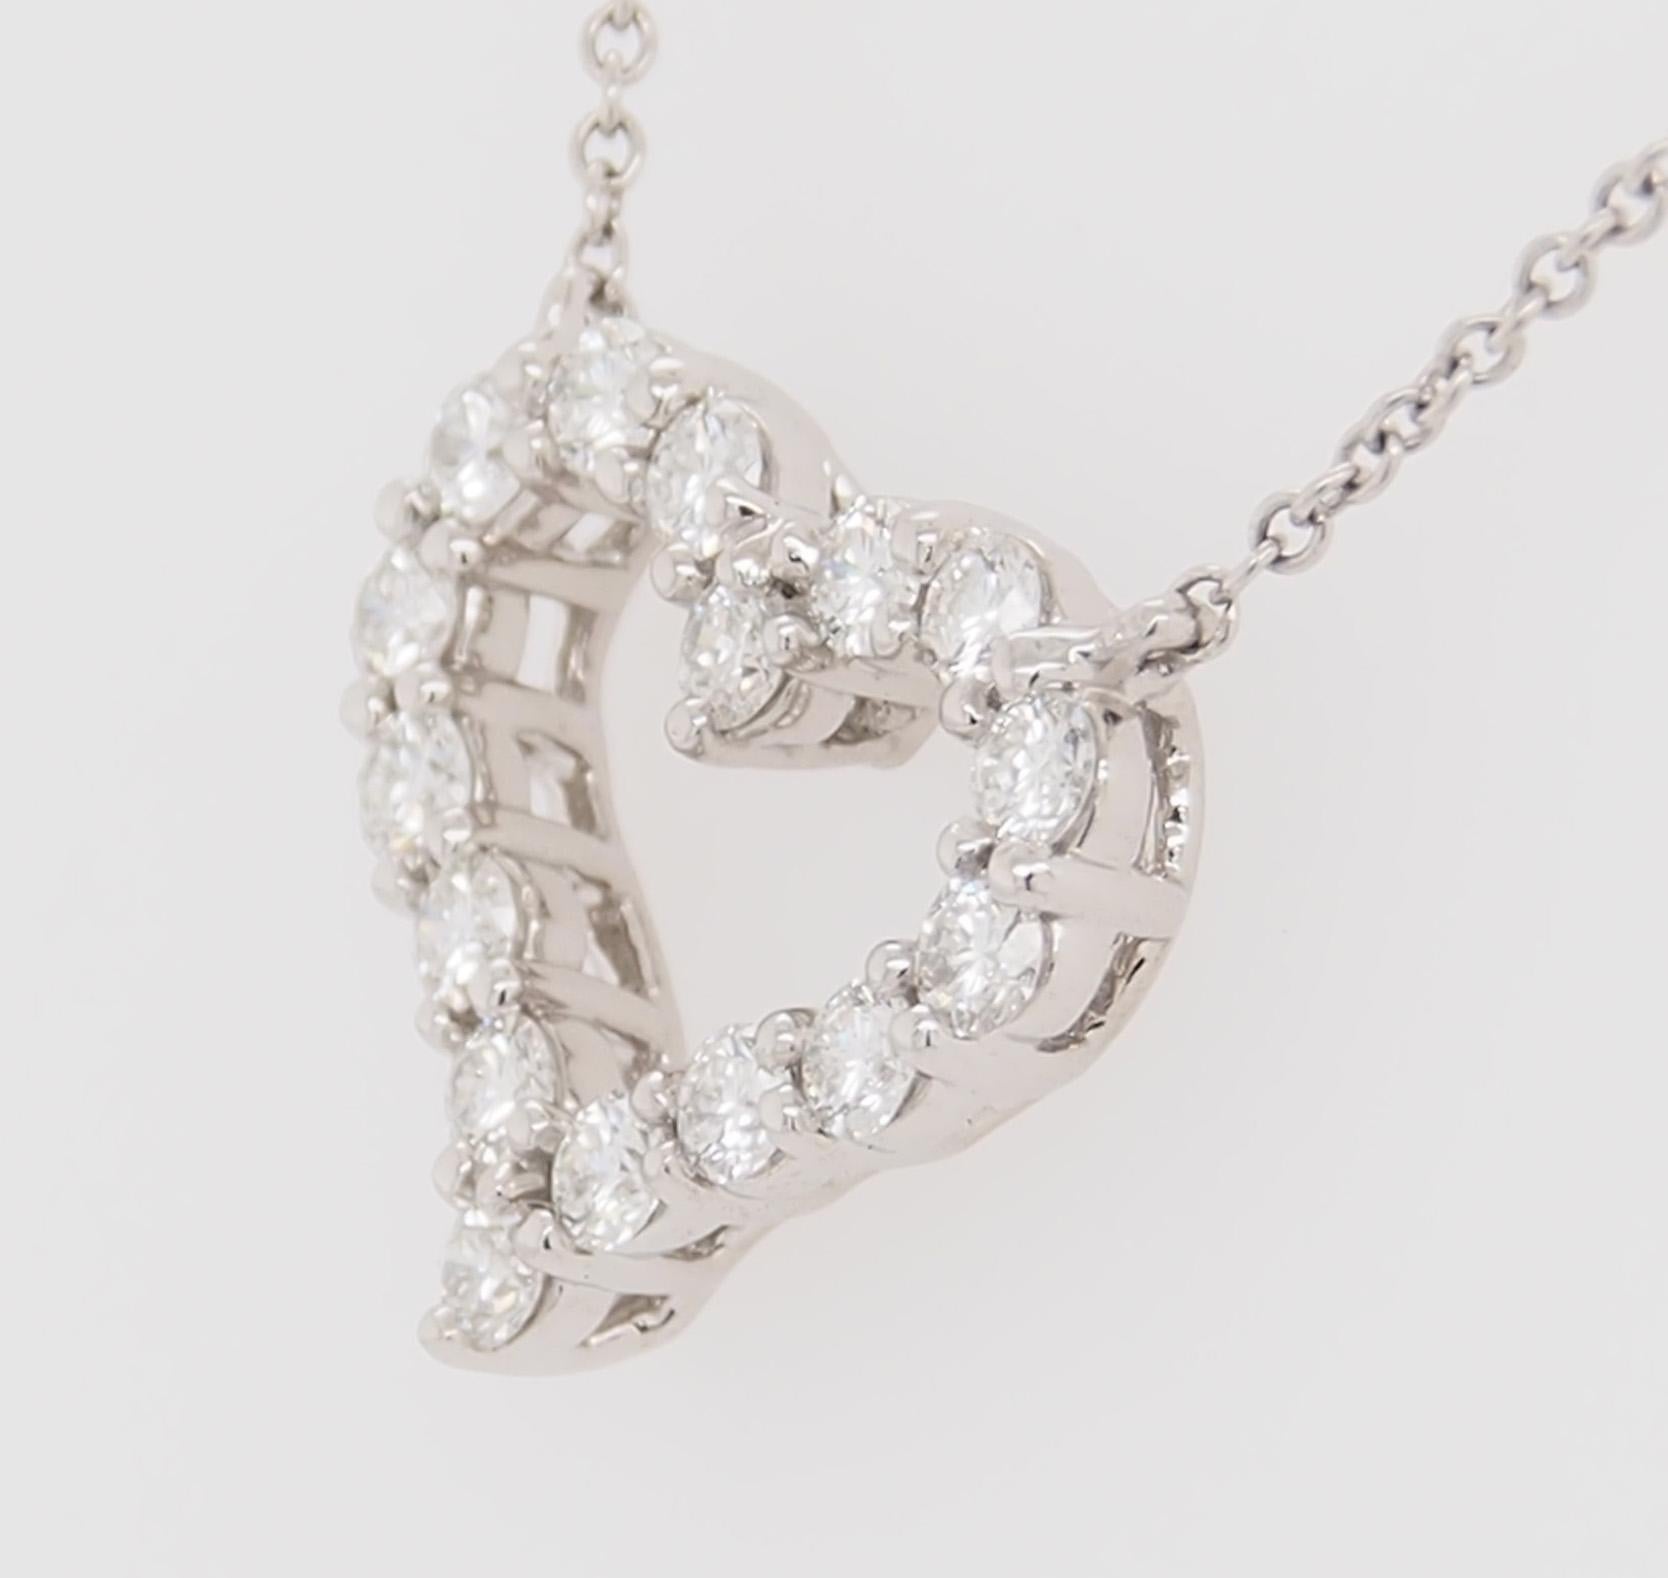 A classic style Tiffany and Co Heart Pendant. (16) Round Brilliant Cut Diamonds E-F in color, VS in clarity, 0.54 total weight are expertly set in Platinum. The necklace is 17 inches long, the heart is 5/8 inch wide, 1/2 inch in height and weighs